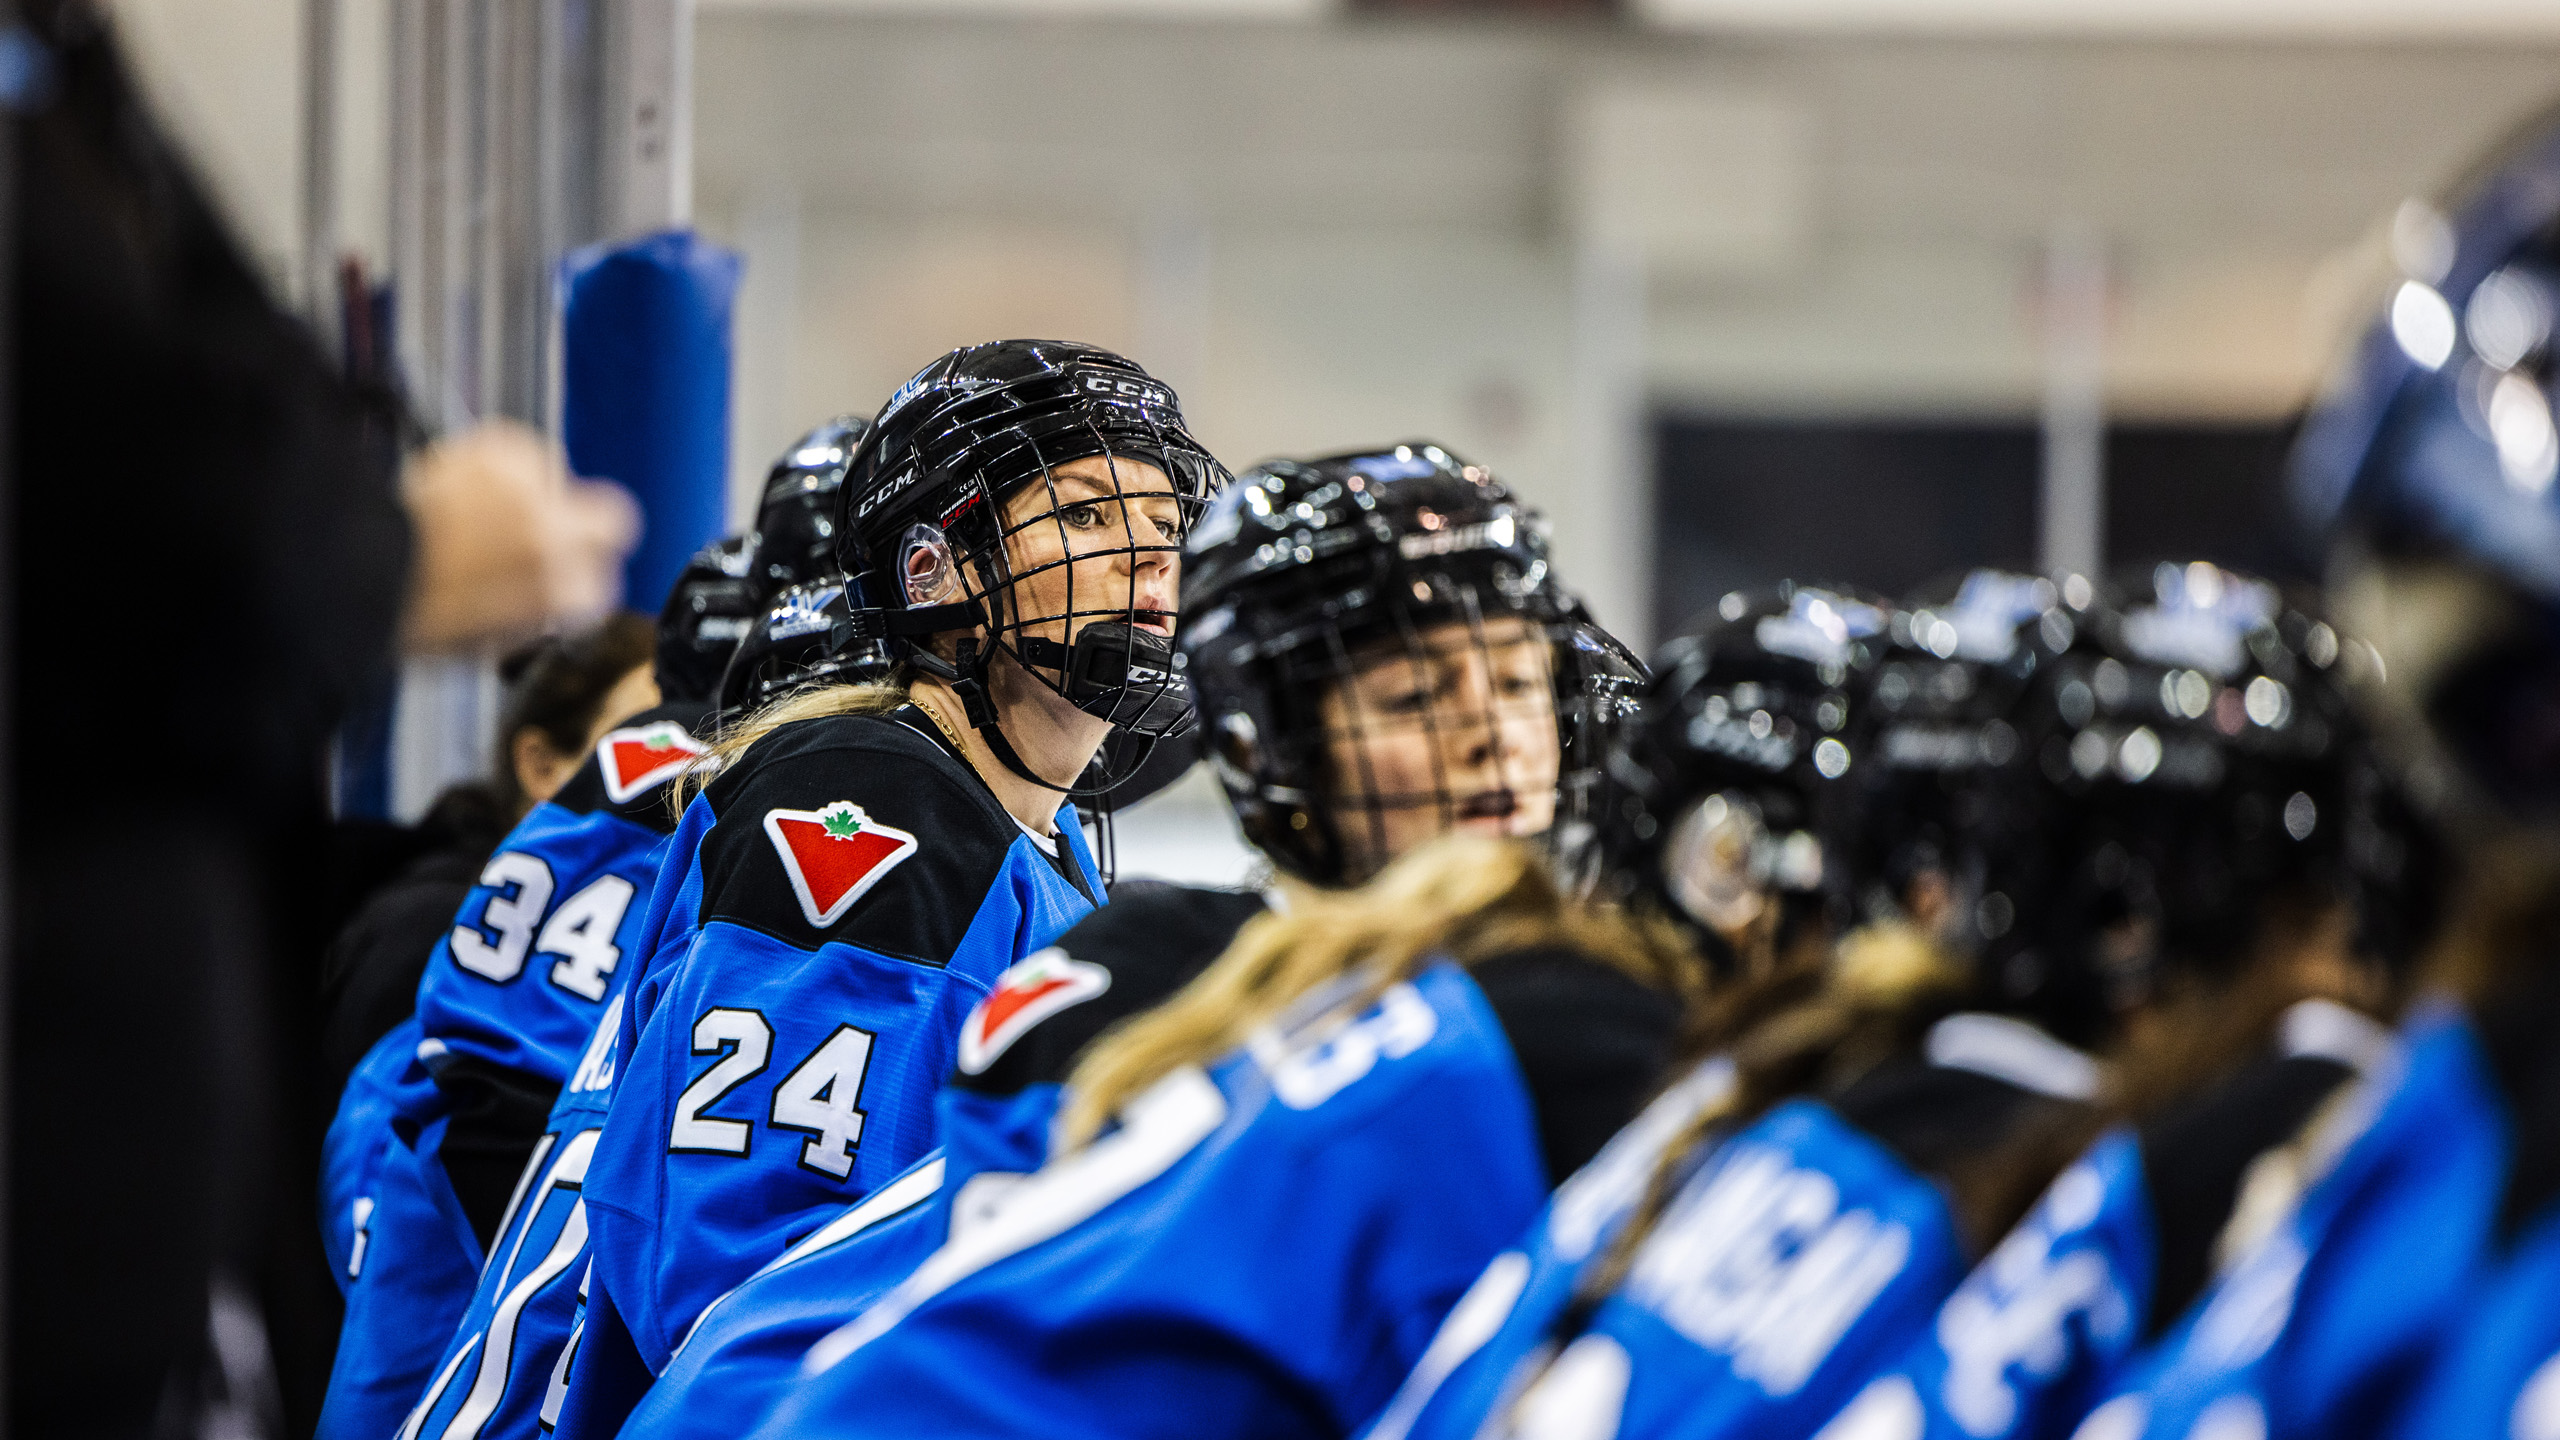 PWHL Toronto players on the bench stare at the ice